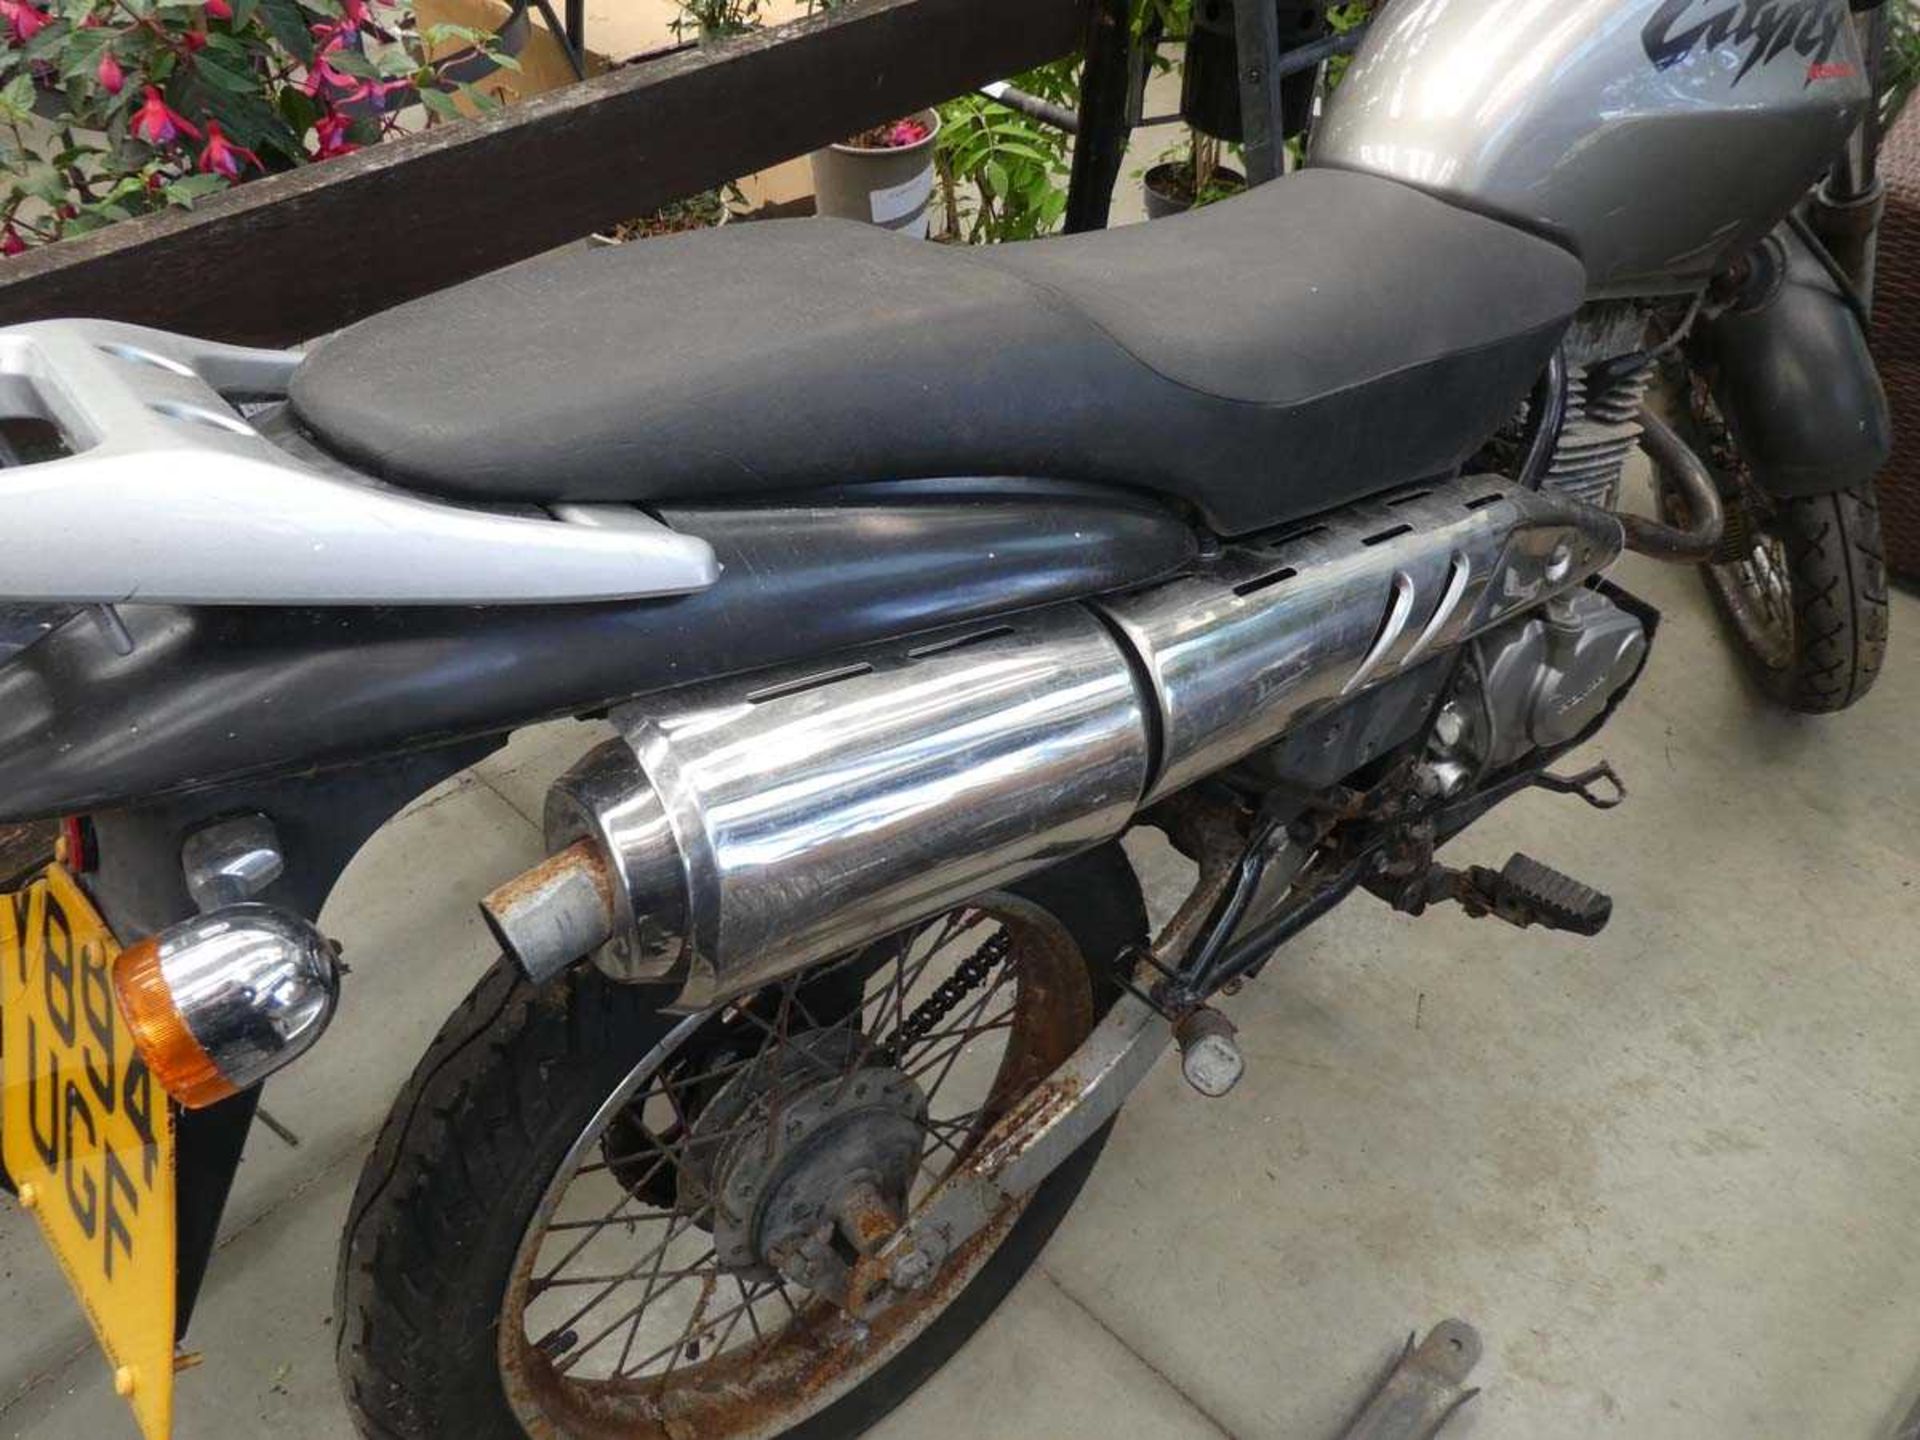 Y894 UGF Honda City Fly 124cc petrol motorcycle in black, with V5 and key - Image 3 of 3